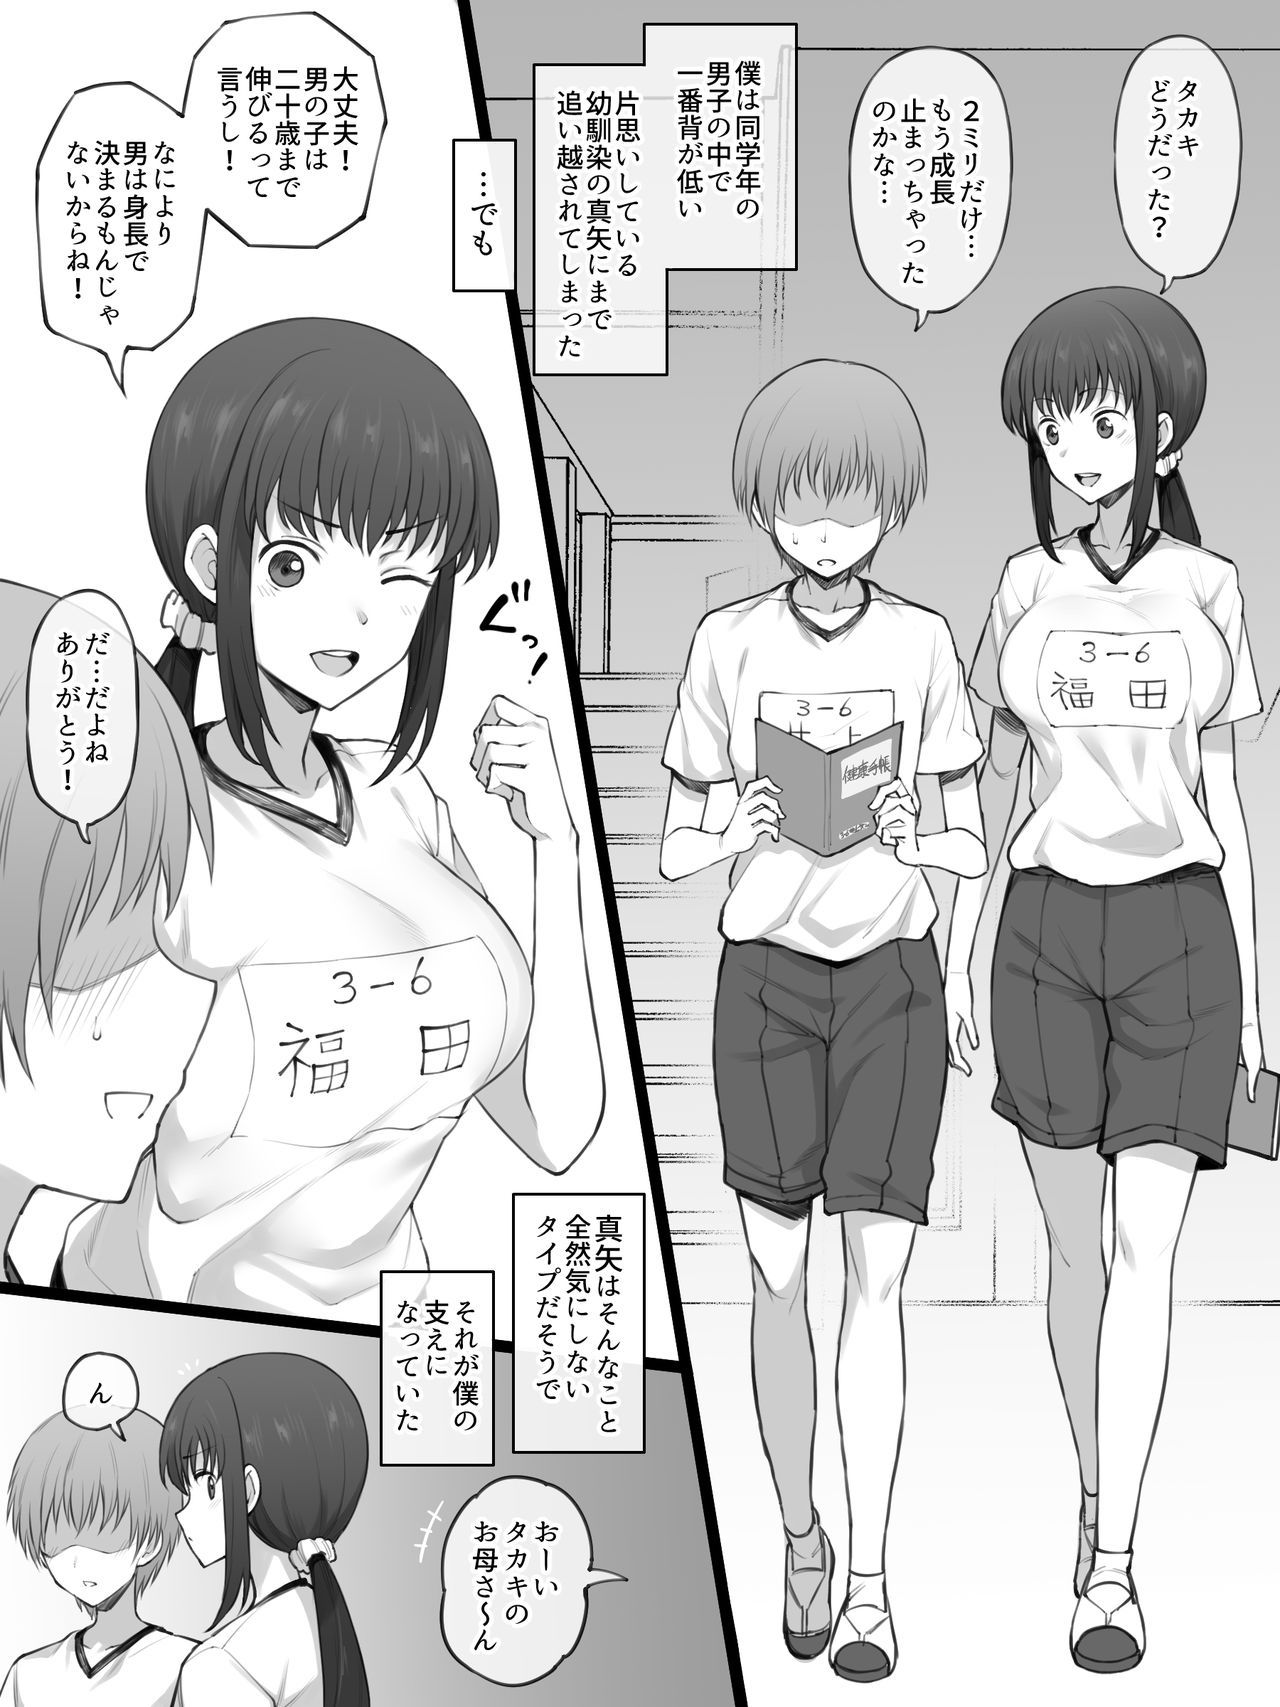 【Image】The most erotic club activity is the women's volleyball club wwwwww 9